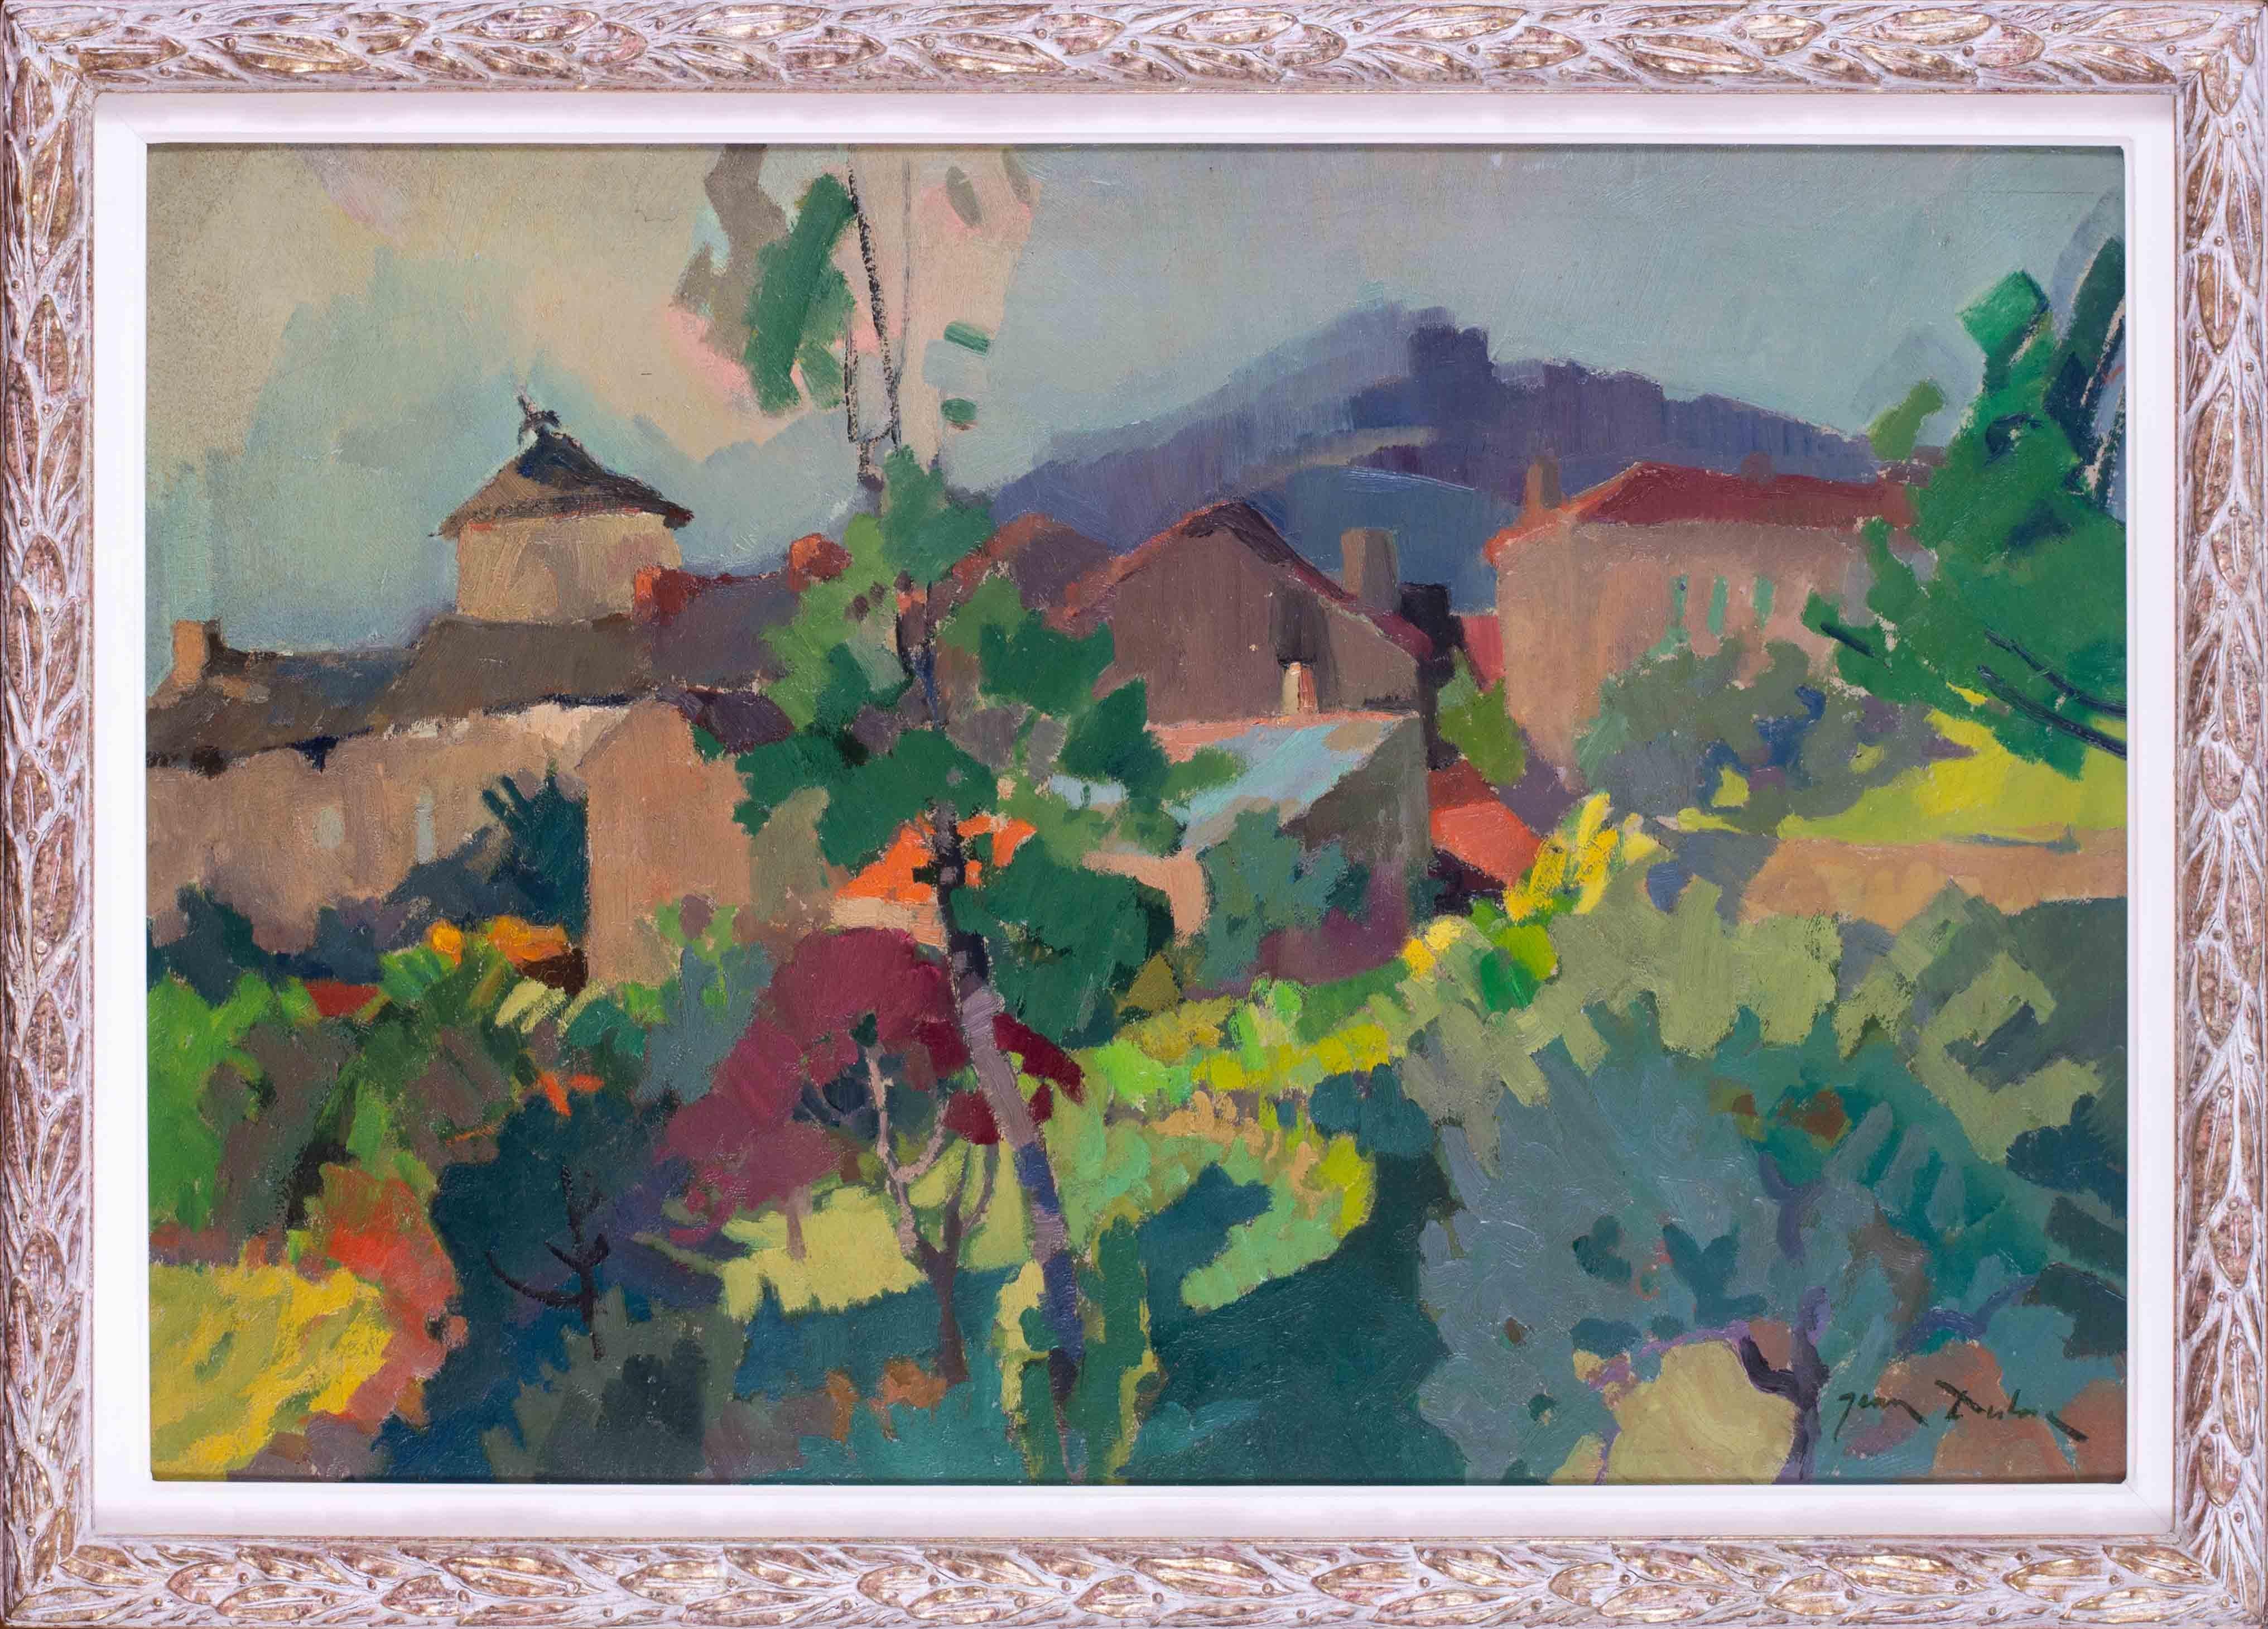 A very attractive Post Impressionist landscape painting painted in 1962 by Lyonnais artist Jean Dulac.

Jean Dulac was born on Bourgoin but from the age of 5 became a lifelong resident of Lyon. His father was a photographer and his influence may